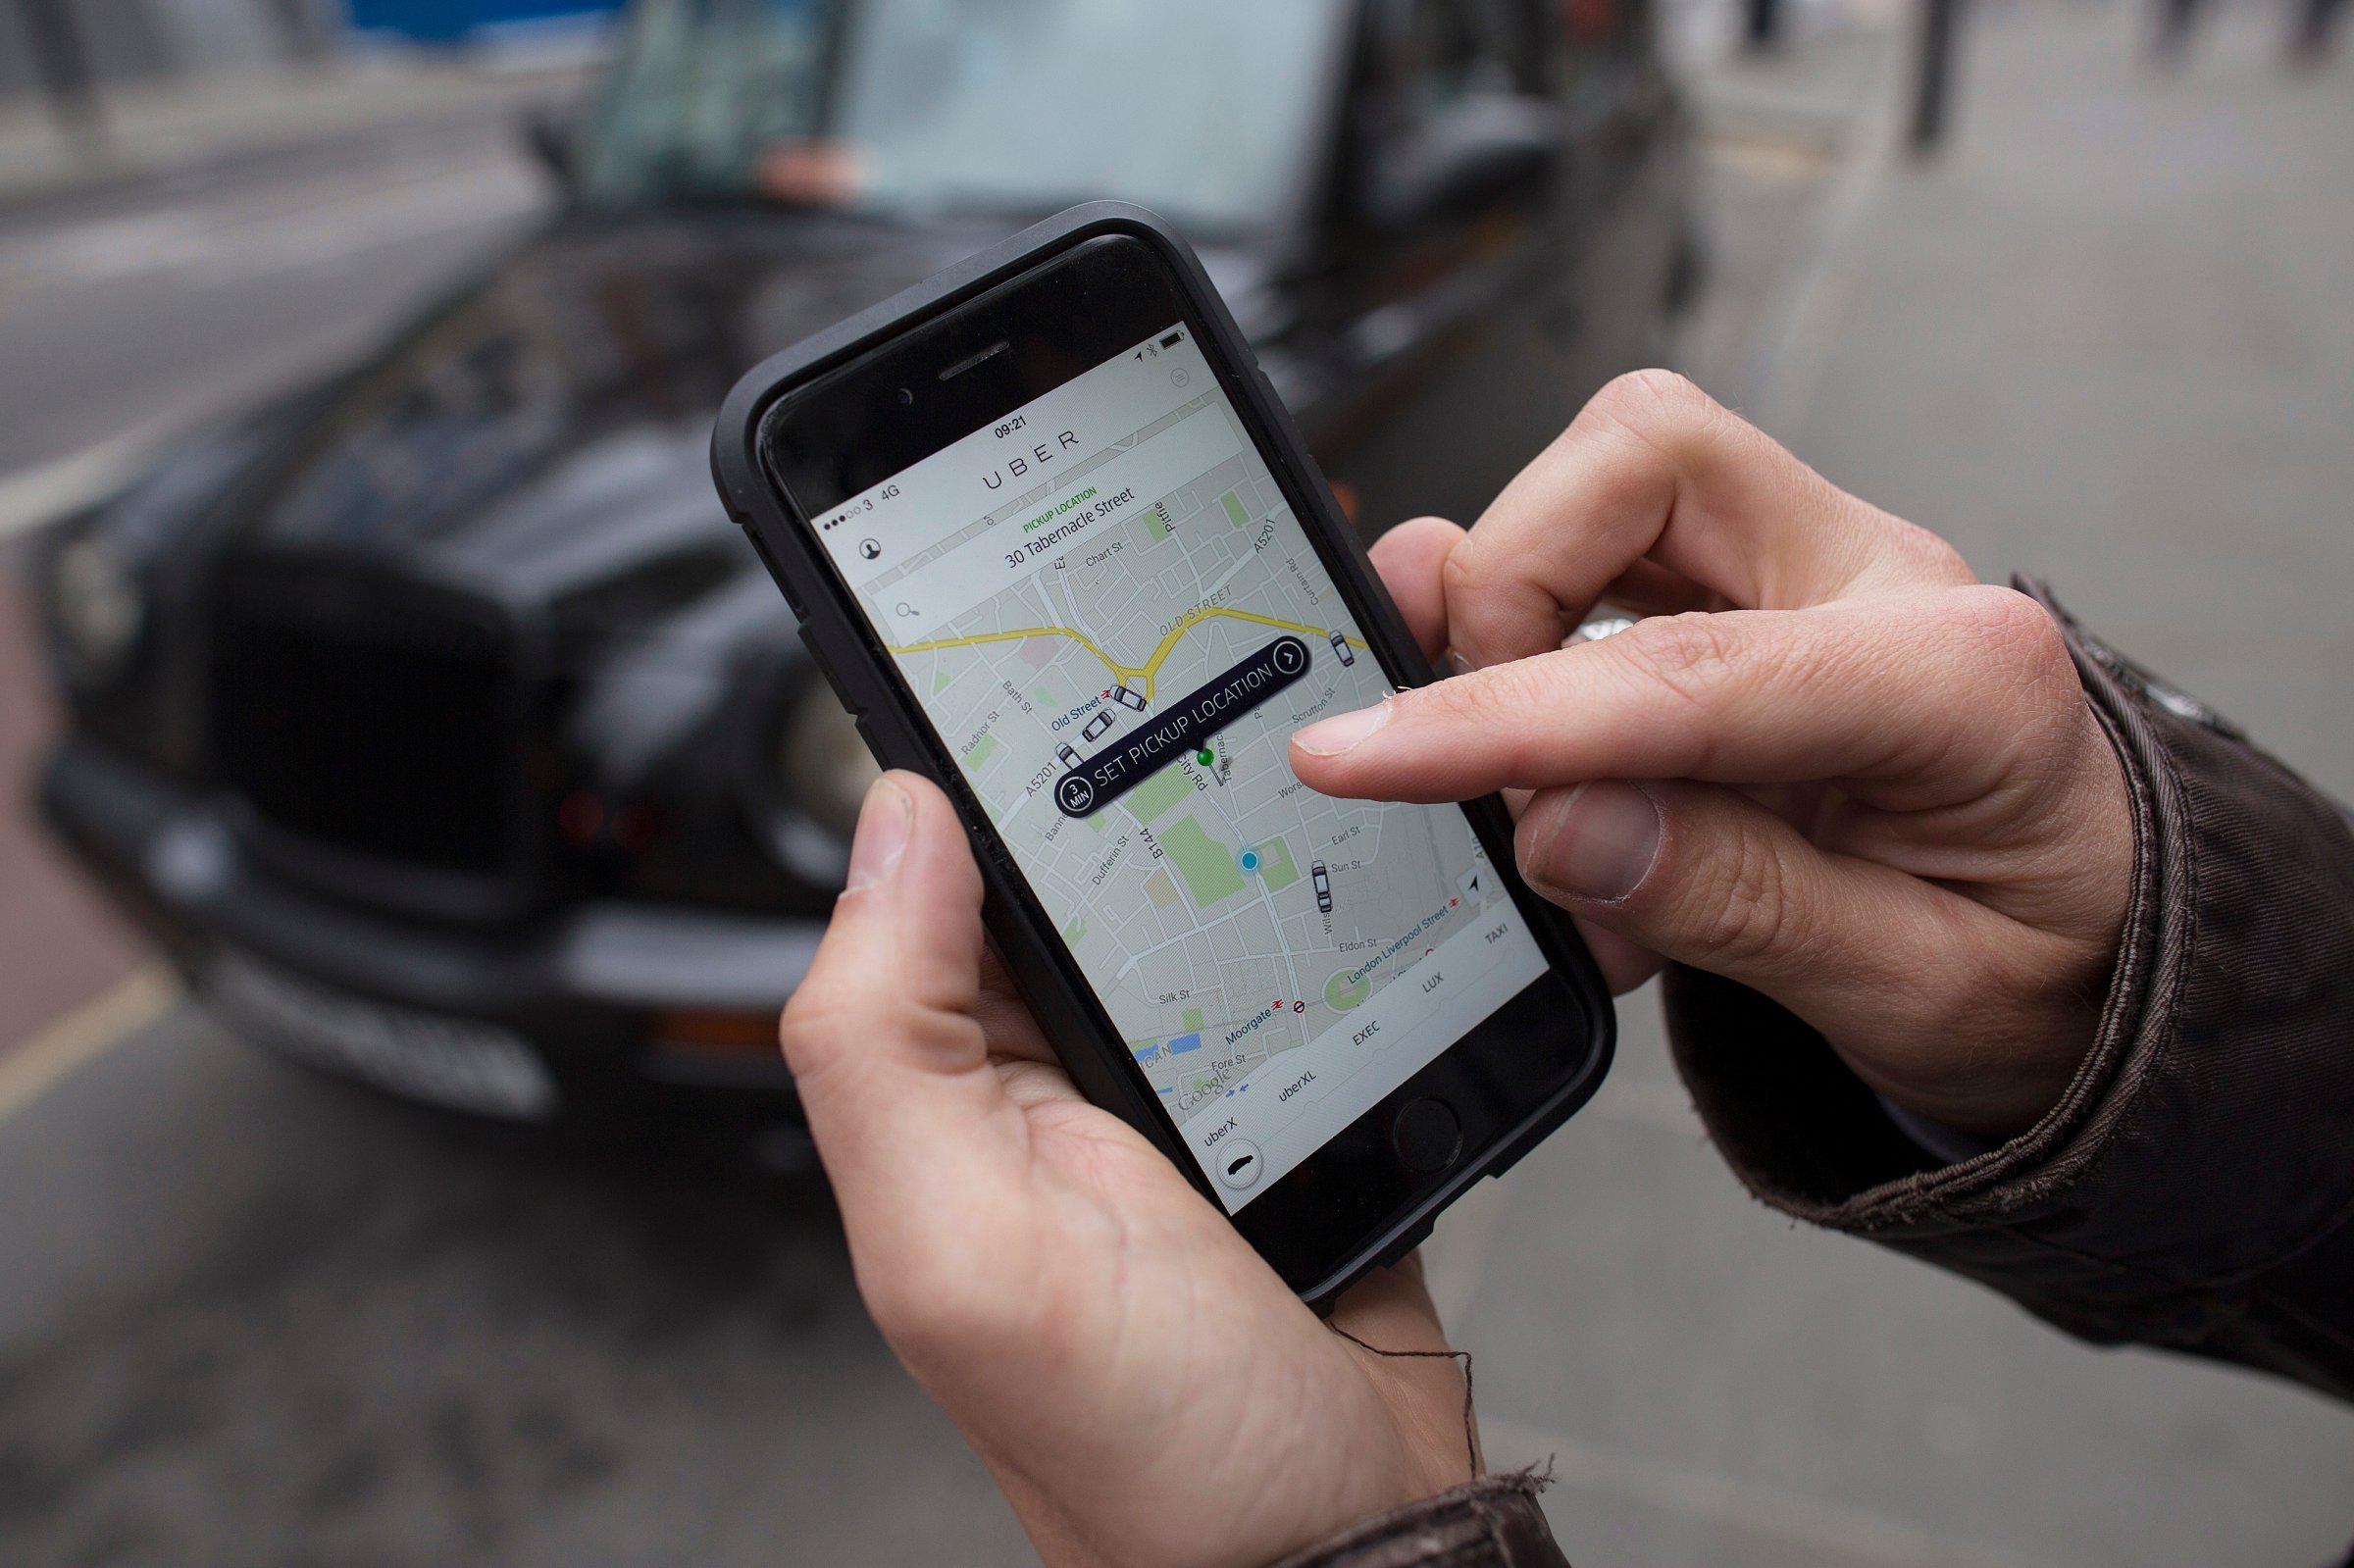 London Taxi Cabs As Uber Technologies Inc. Blitz Leads To Drop in Black Cab Recruits